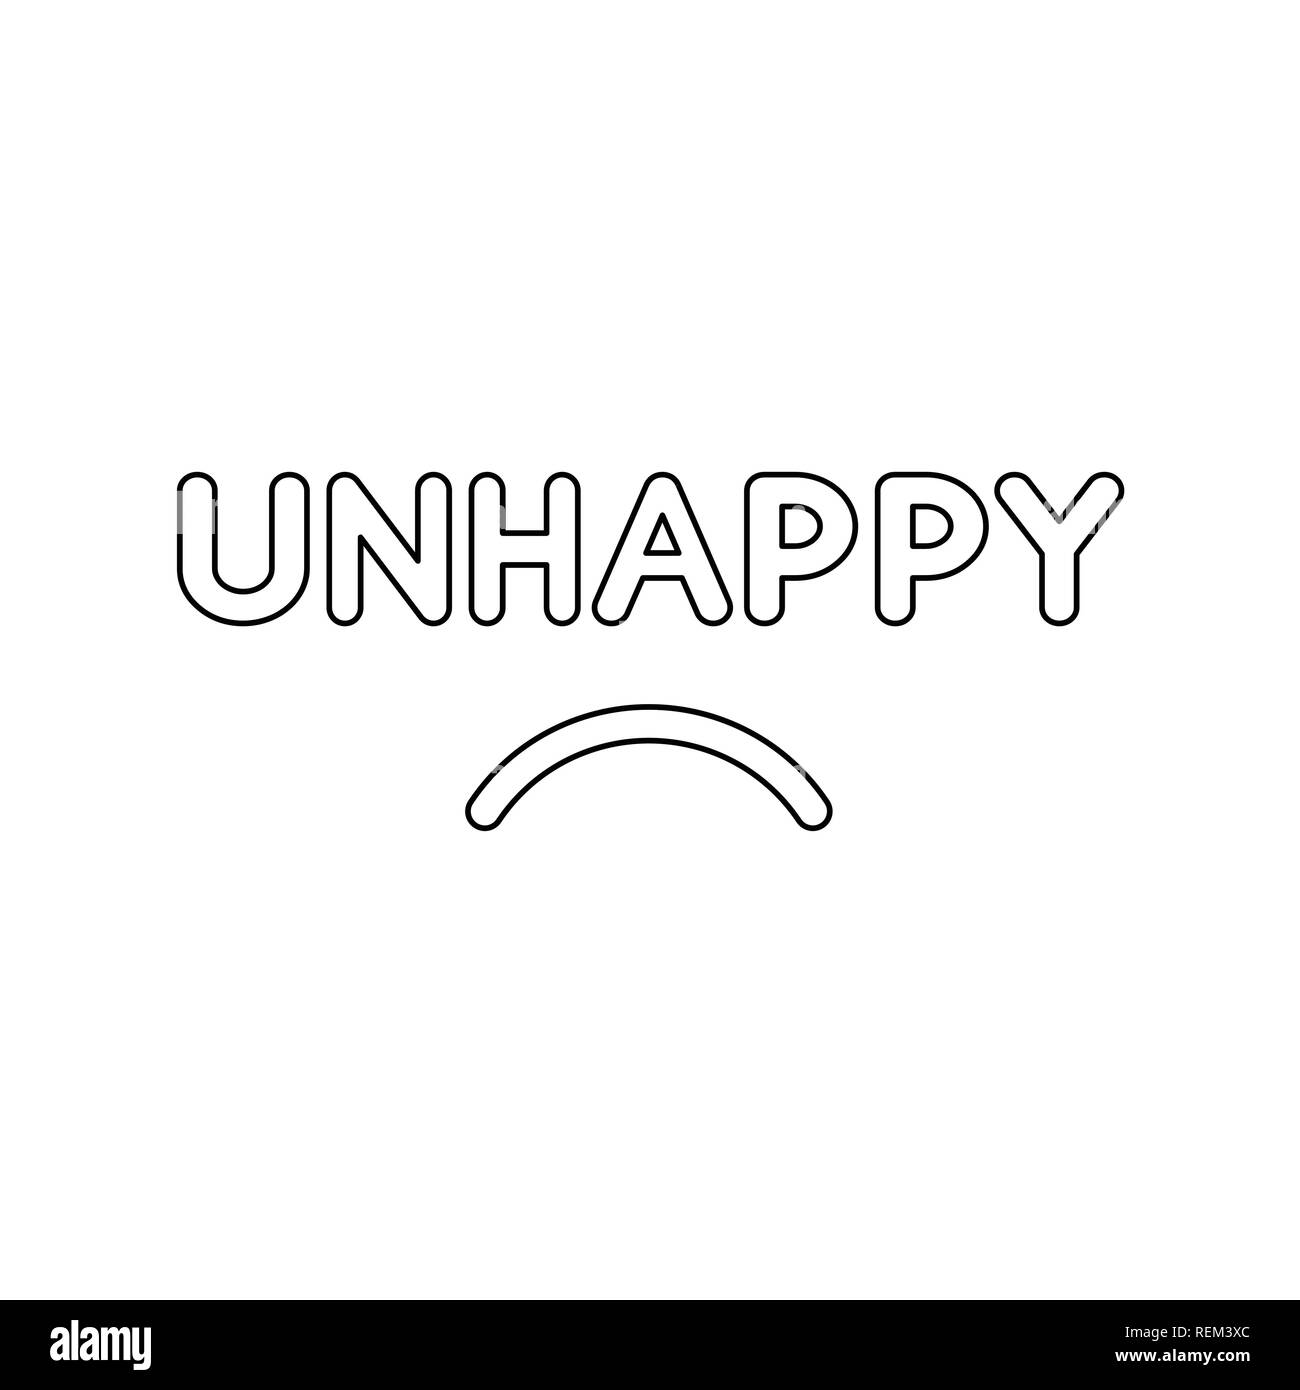 Flat design style vector illustration concept of unhappy text with sulking mouth on white background. Black outlines. Stock Vector